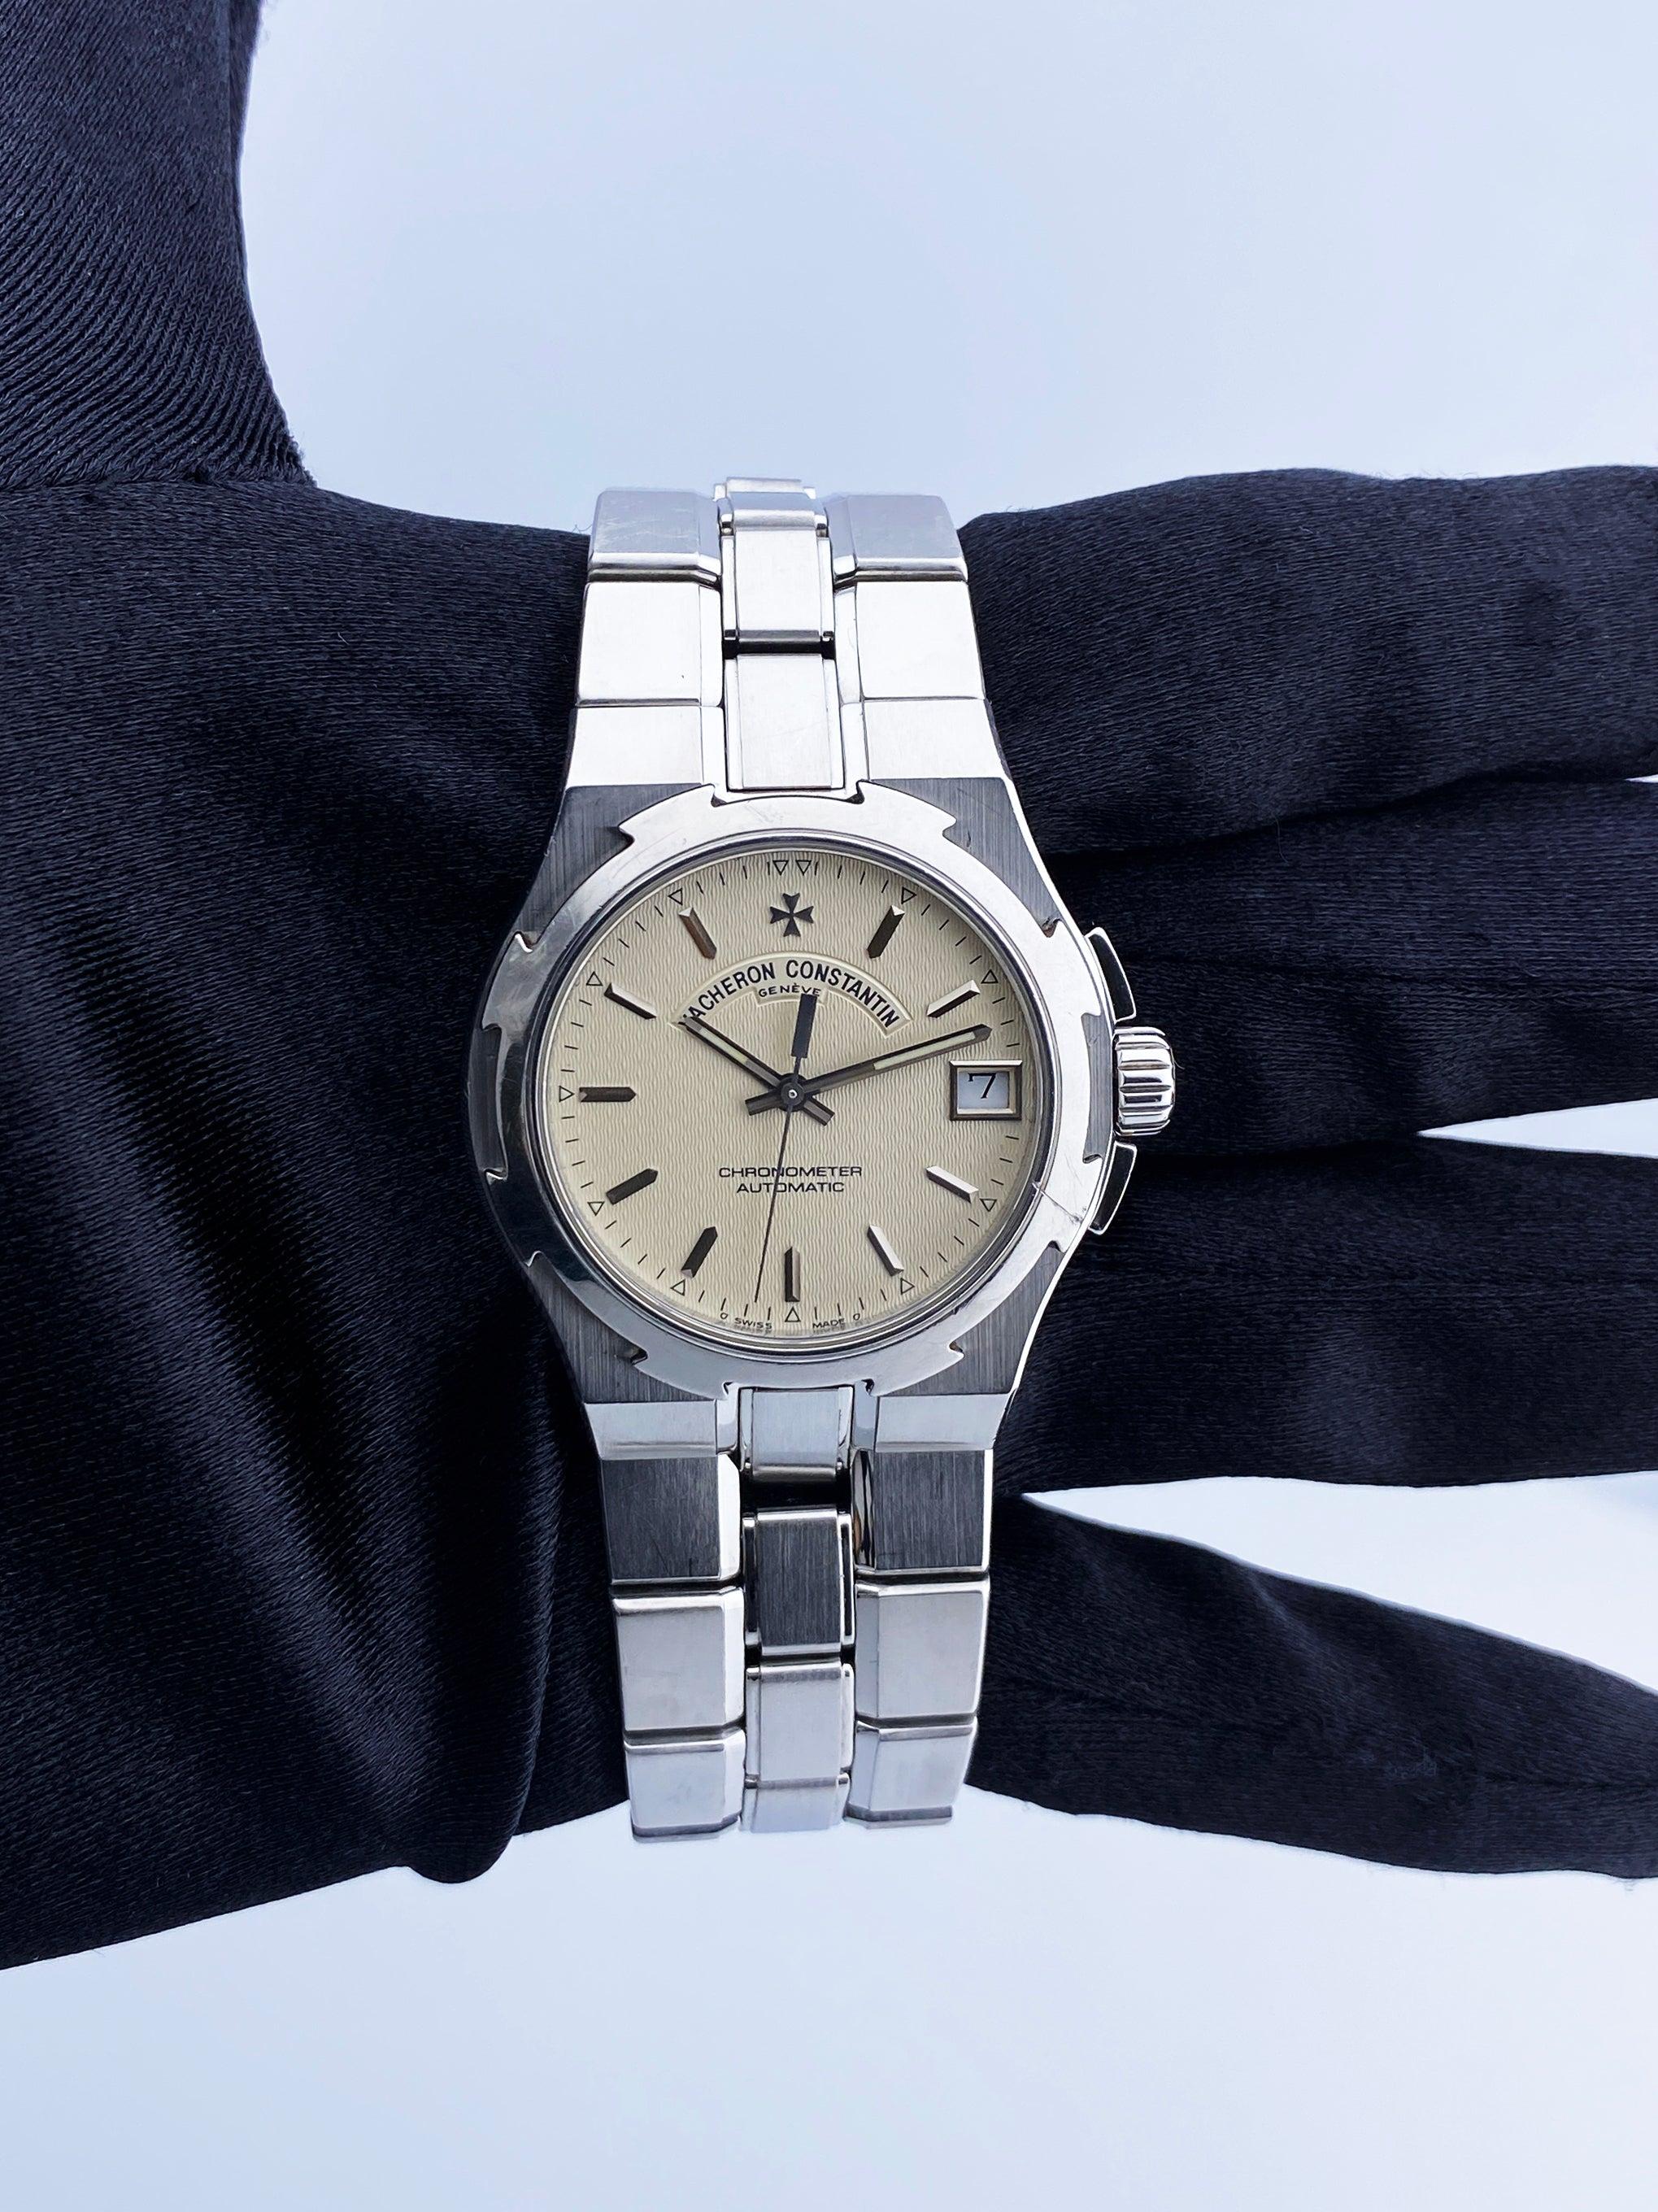 Vacheron Constantin Overseas 42050 Watch. 36mm stainless steel case  with stainless steel bezel. Off-White texture dial with steel gold luminous hands and index hour markers. Minute makers on the outer dial. Date display at 3 o'clock position.